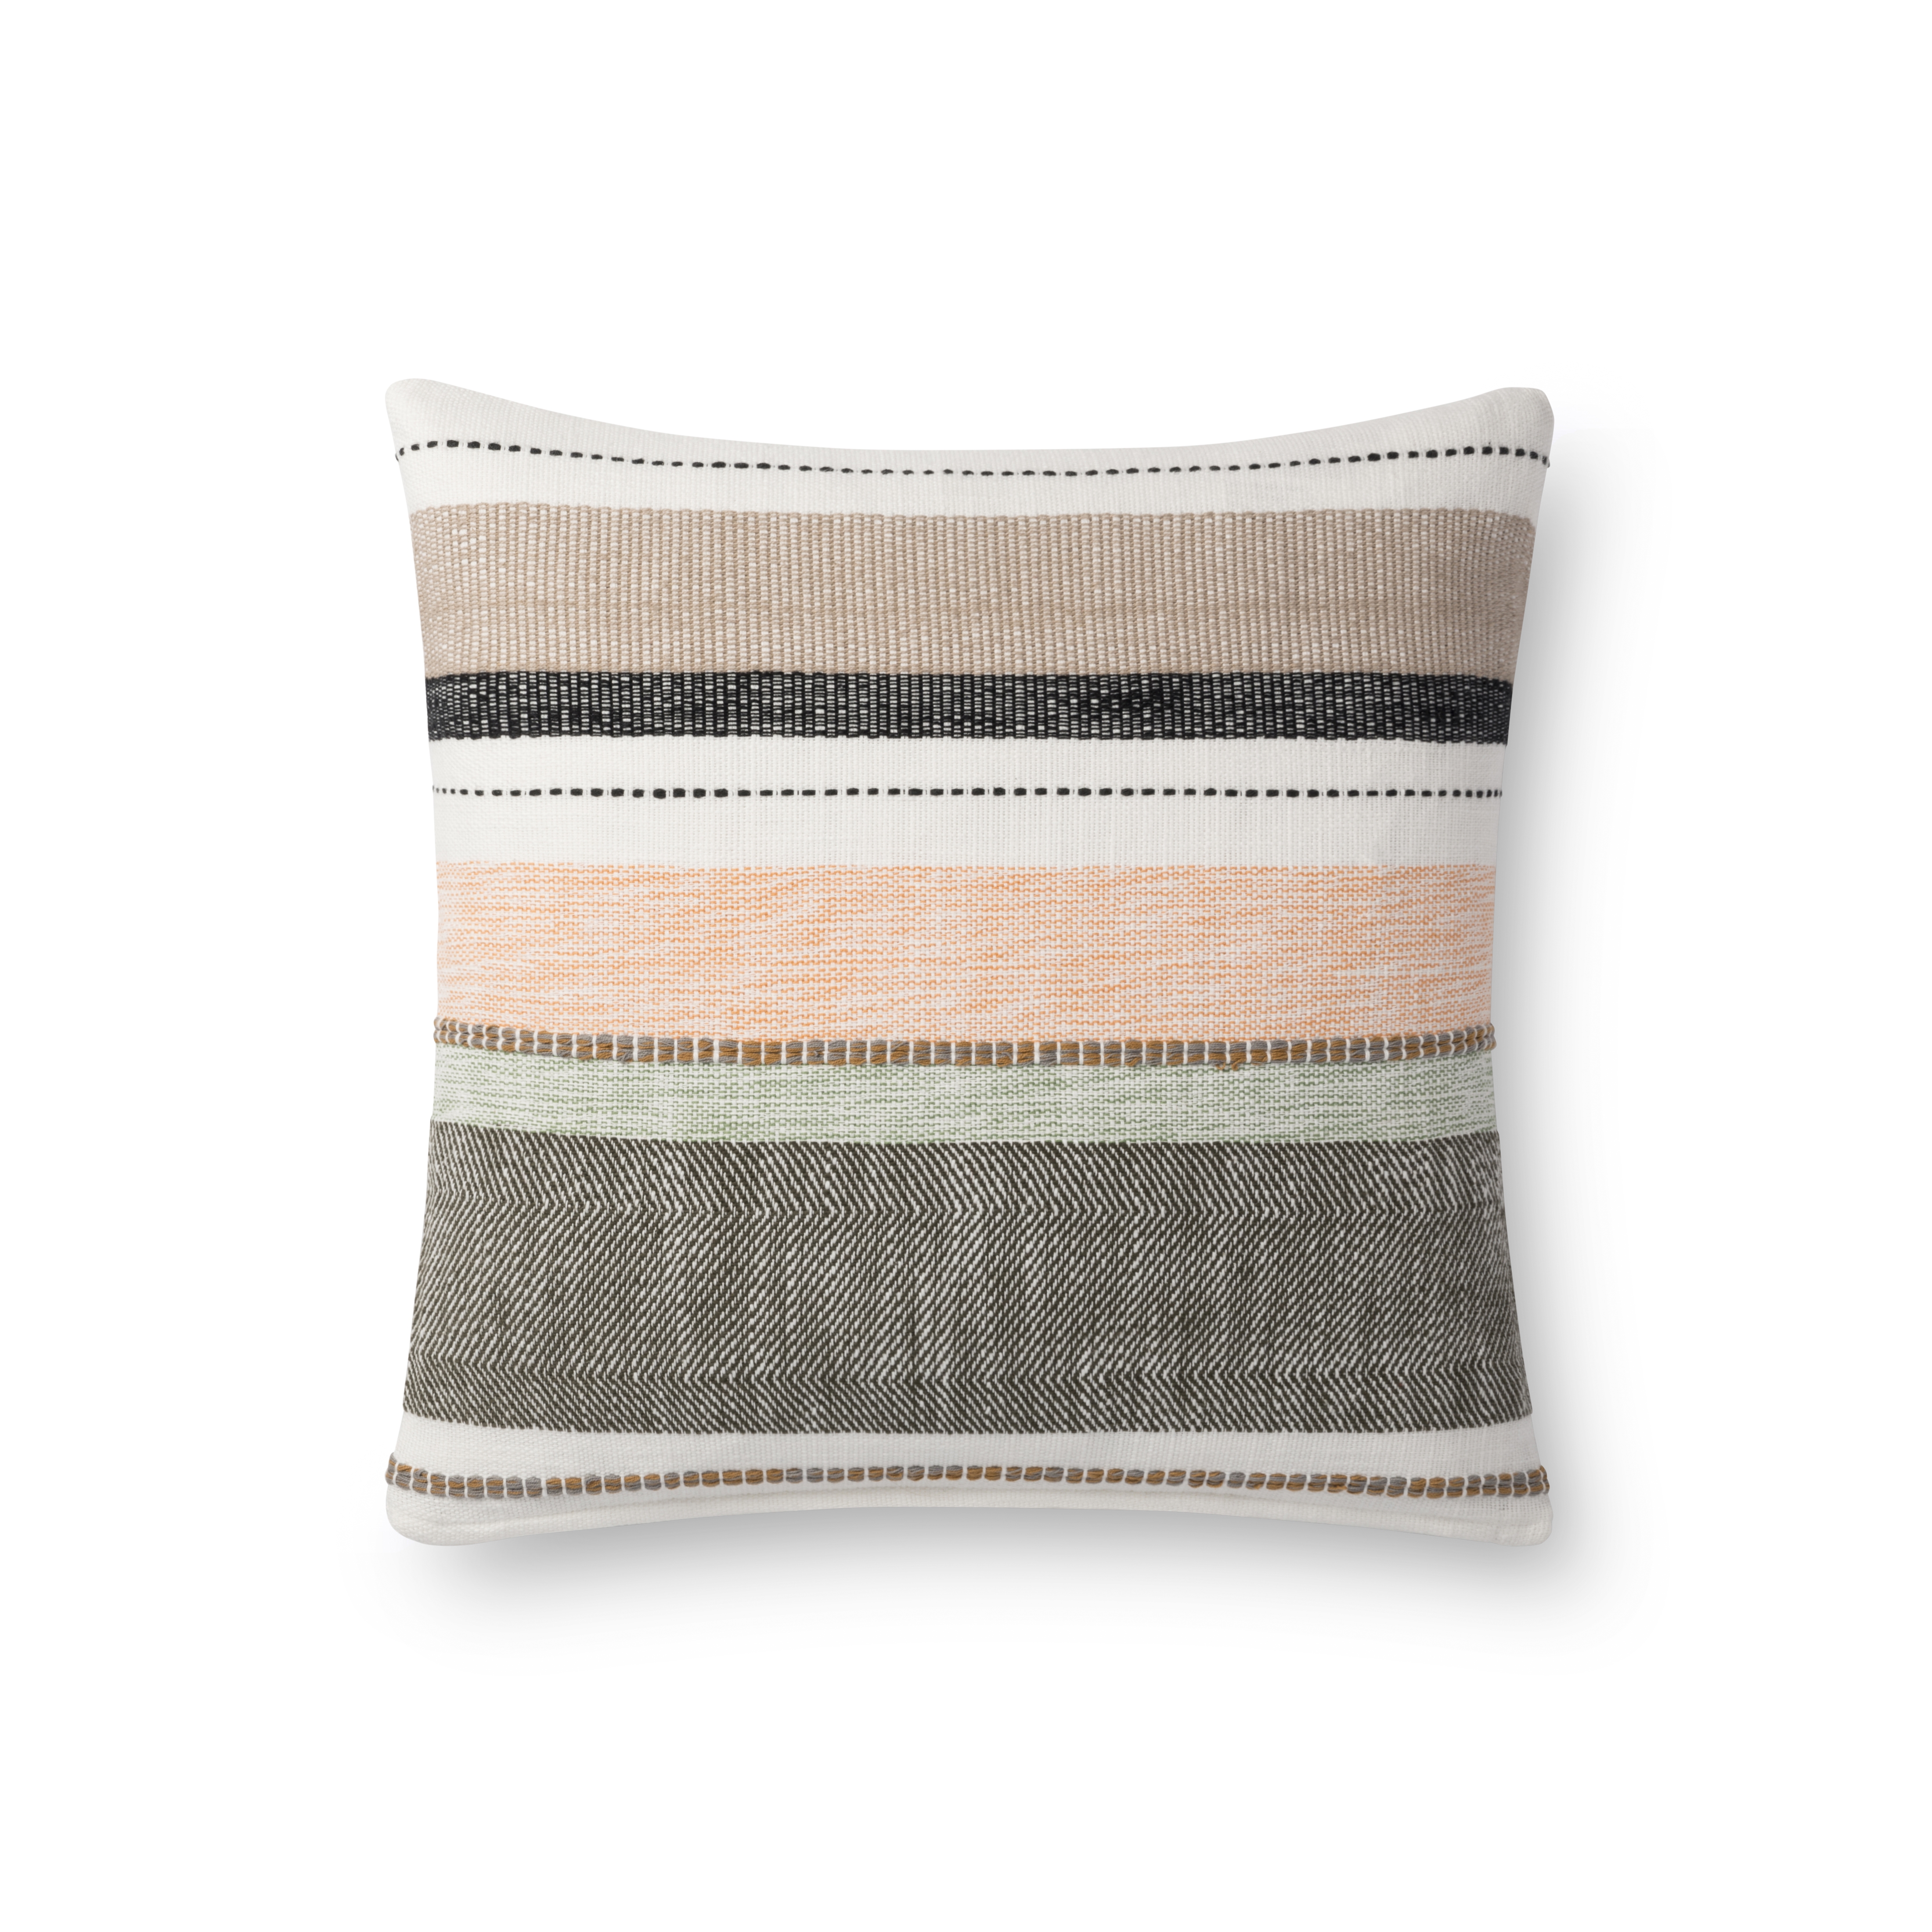 Magnolia Home by Joanna Gaines x Loloi Pillows P1112 Multi / Blush 18" x 18" Cover Only - Image 0